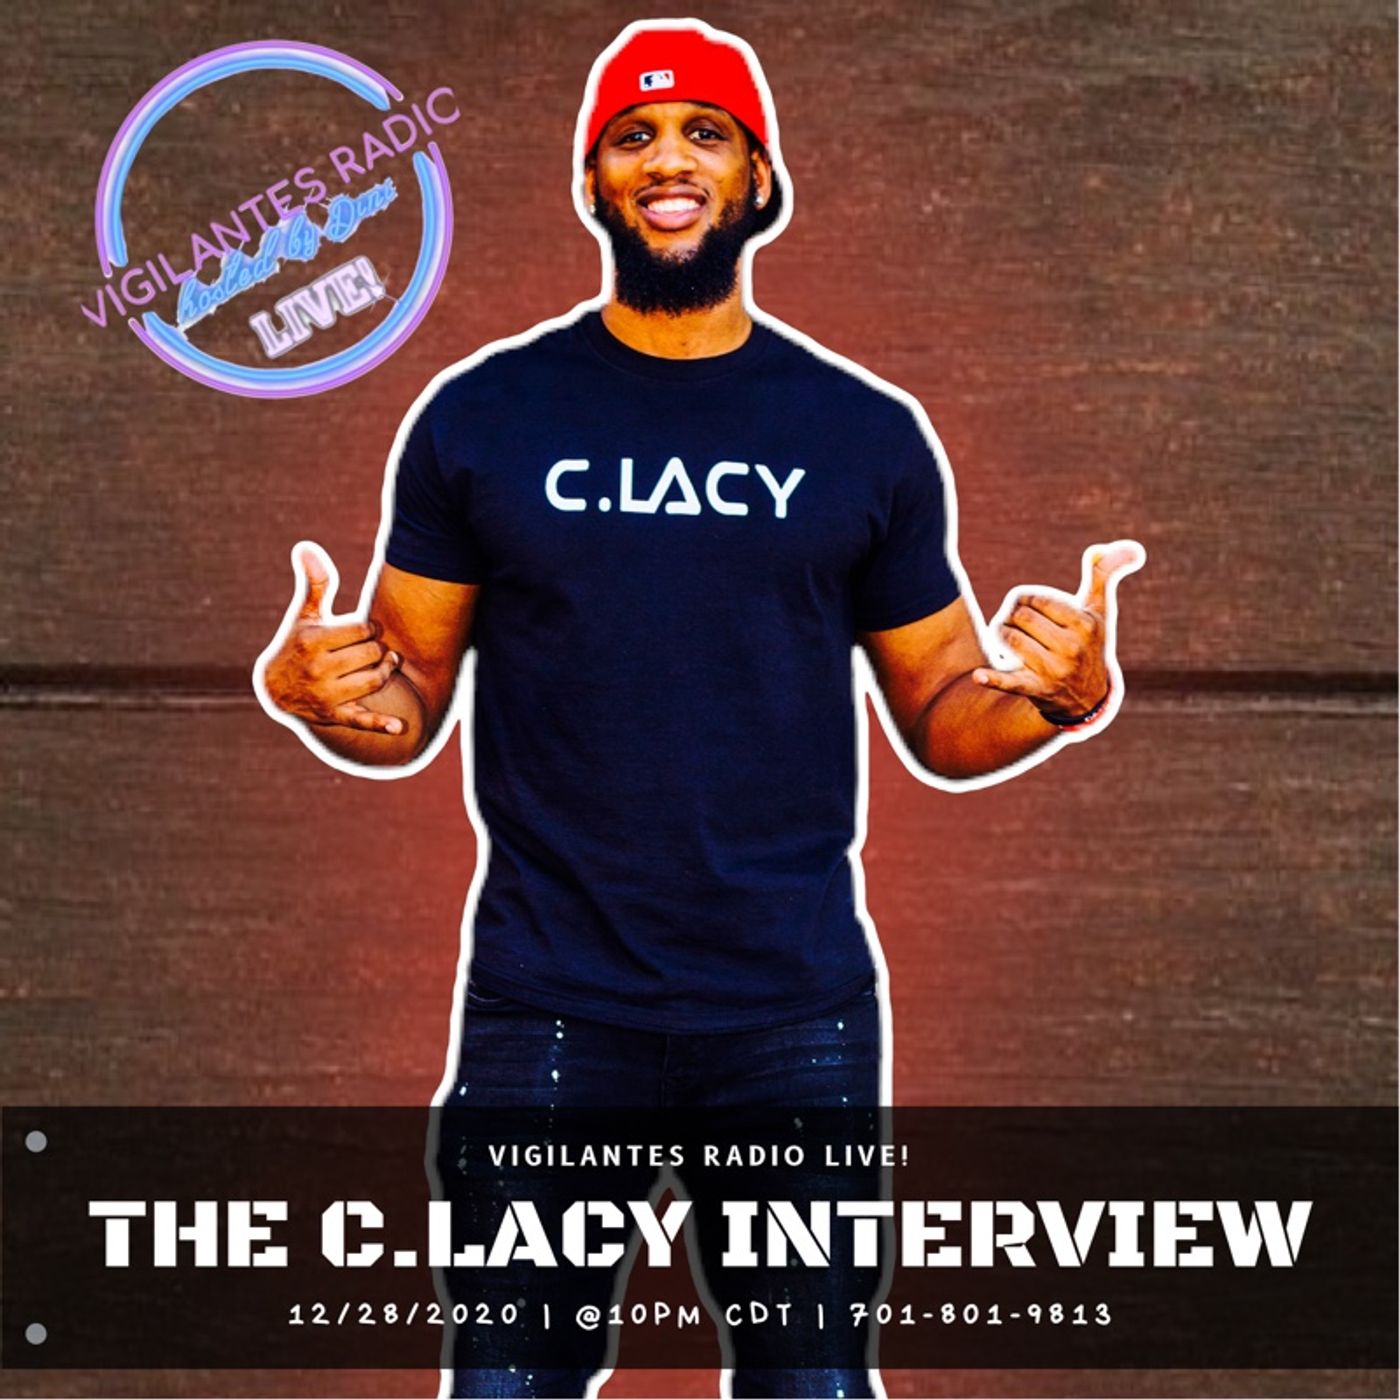 The C.Lacy Interview. Image